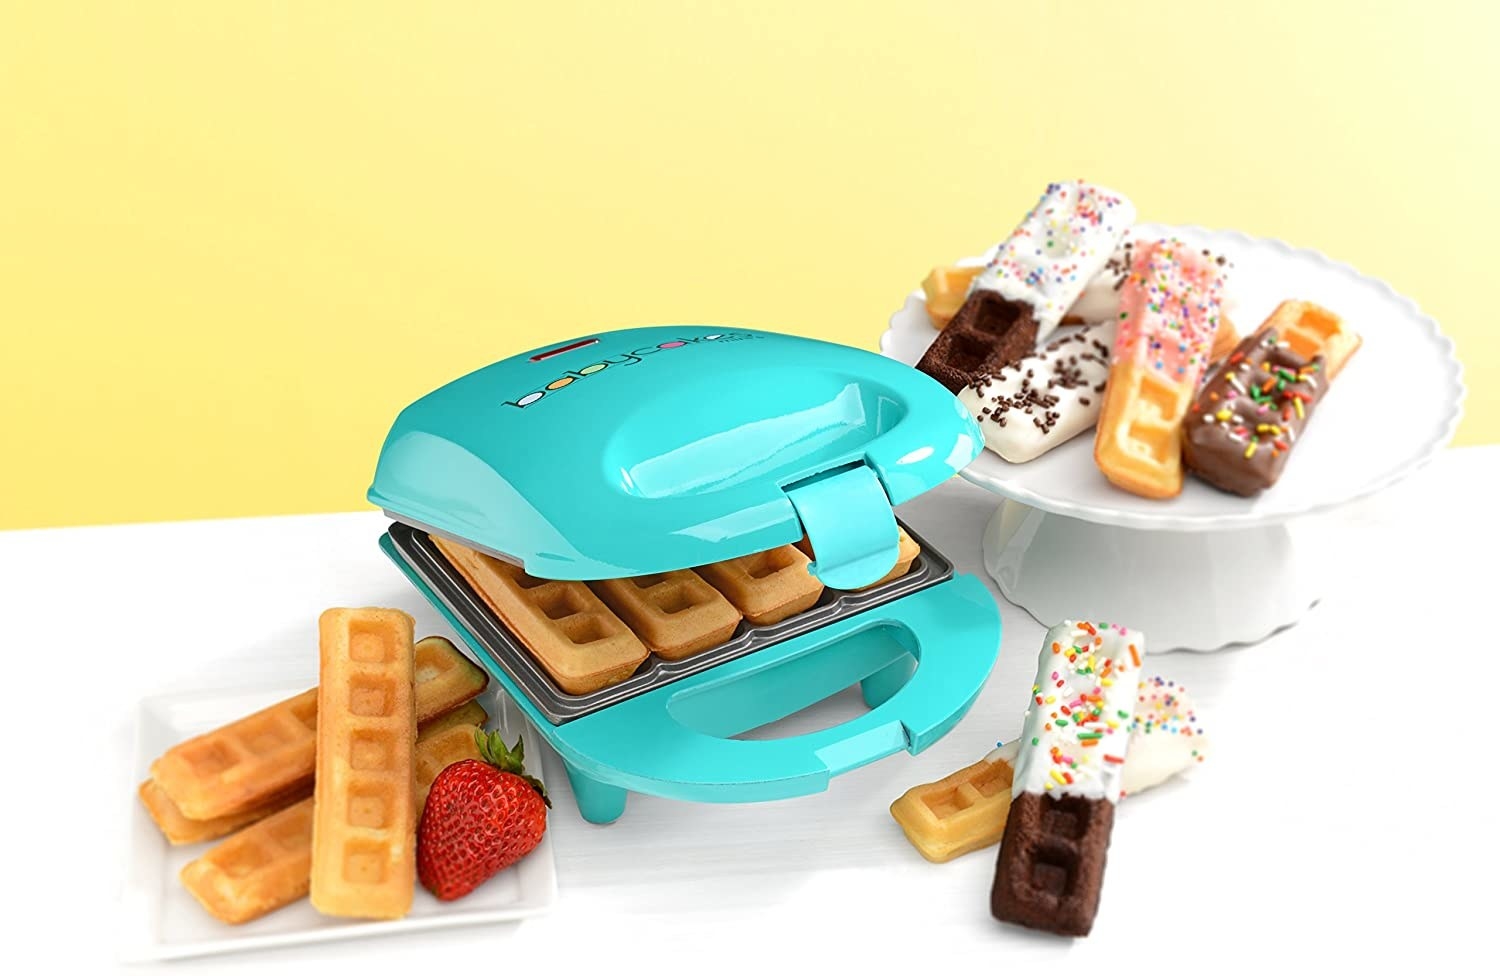 A waffle stick maker with waffle sticks on a plate some of which have been dipped in chocolate and have sprinkles